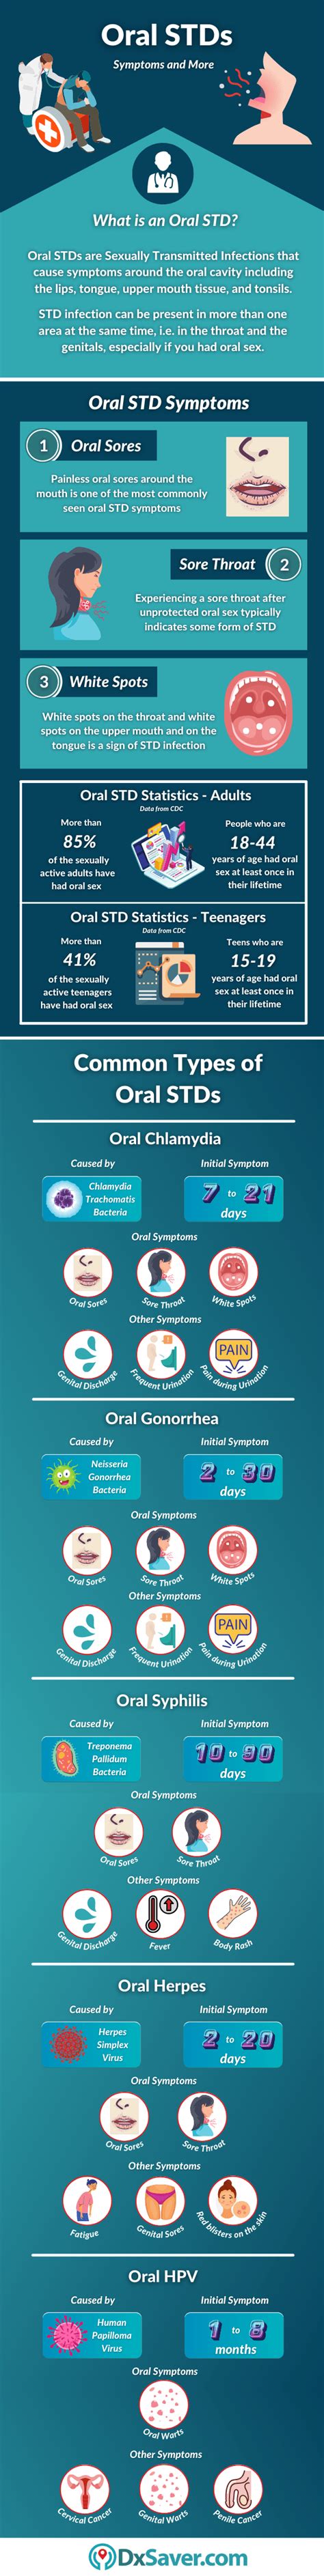 symptoms and causes of oral std know more on names of oral stds